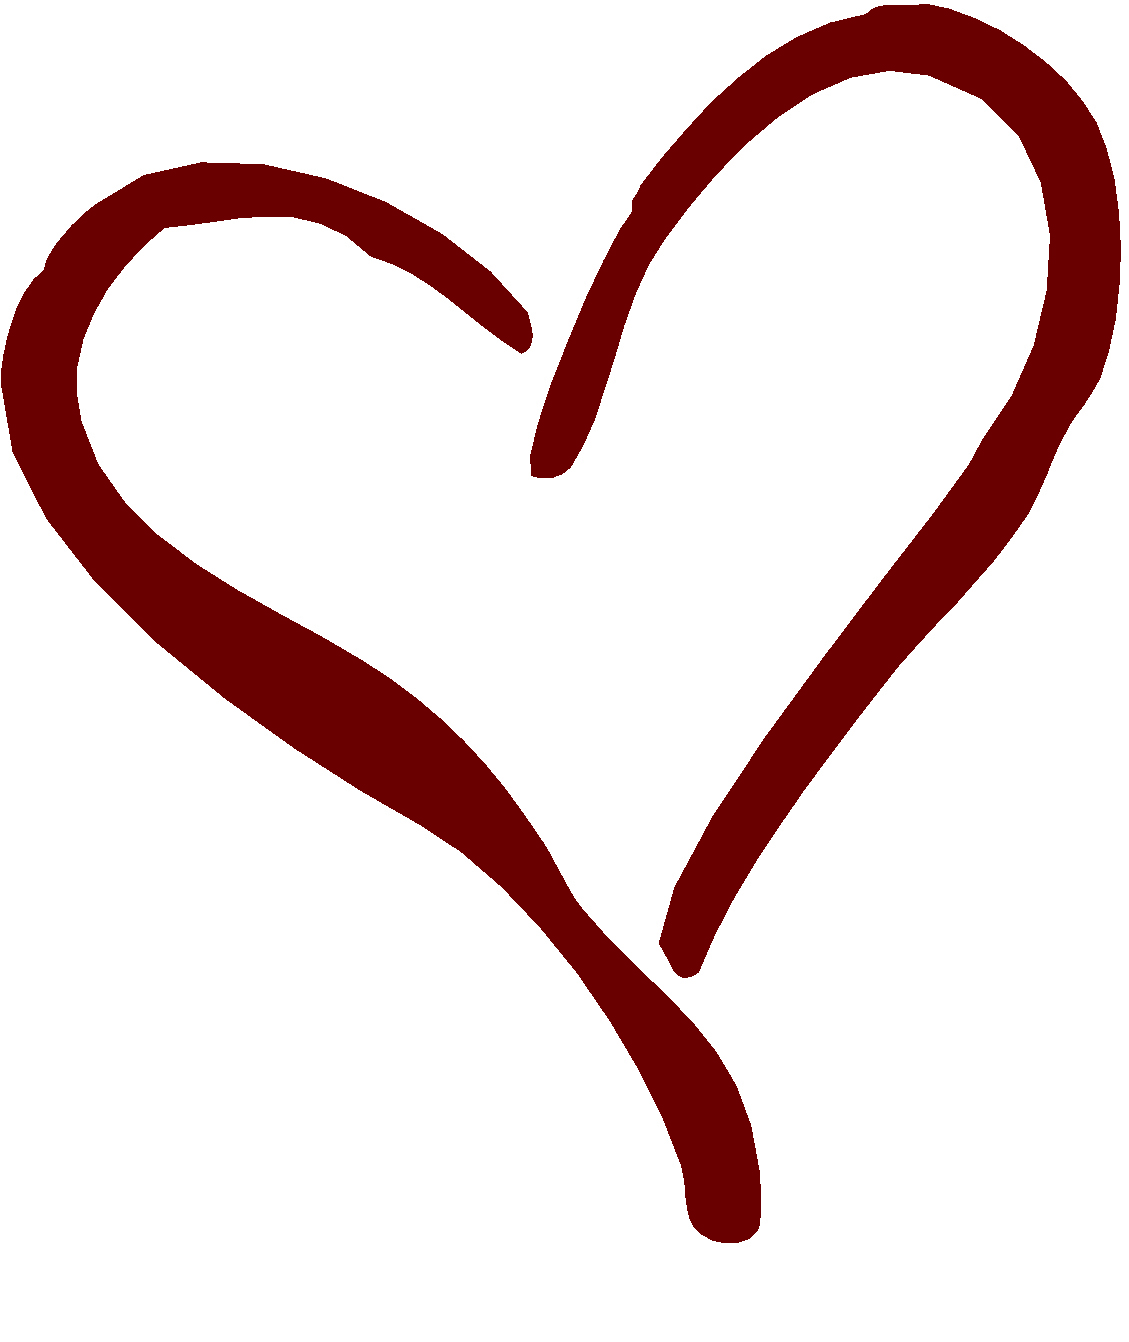 Clipart of heart outline